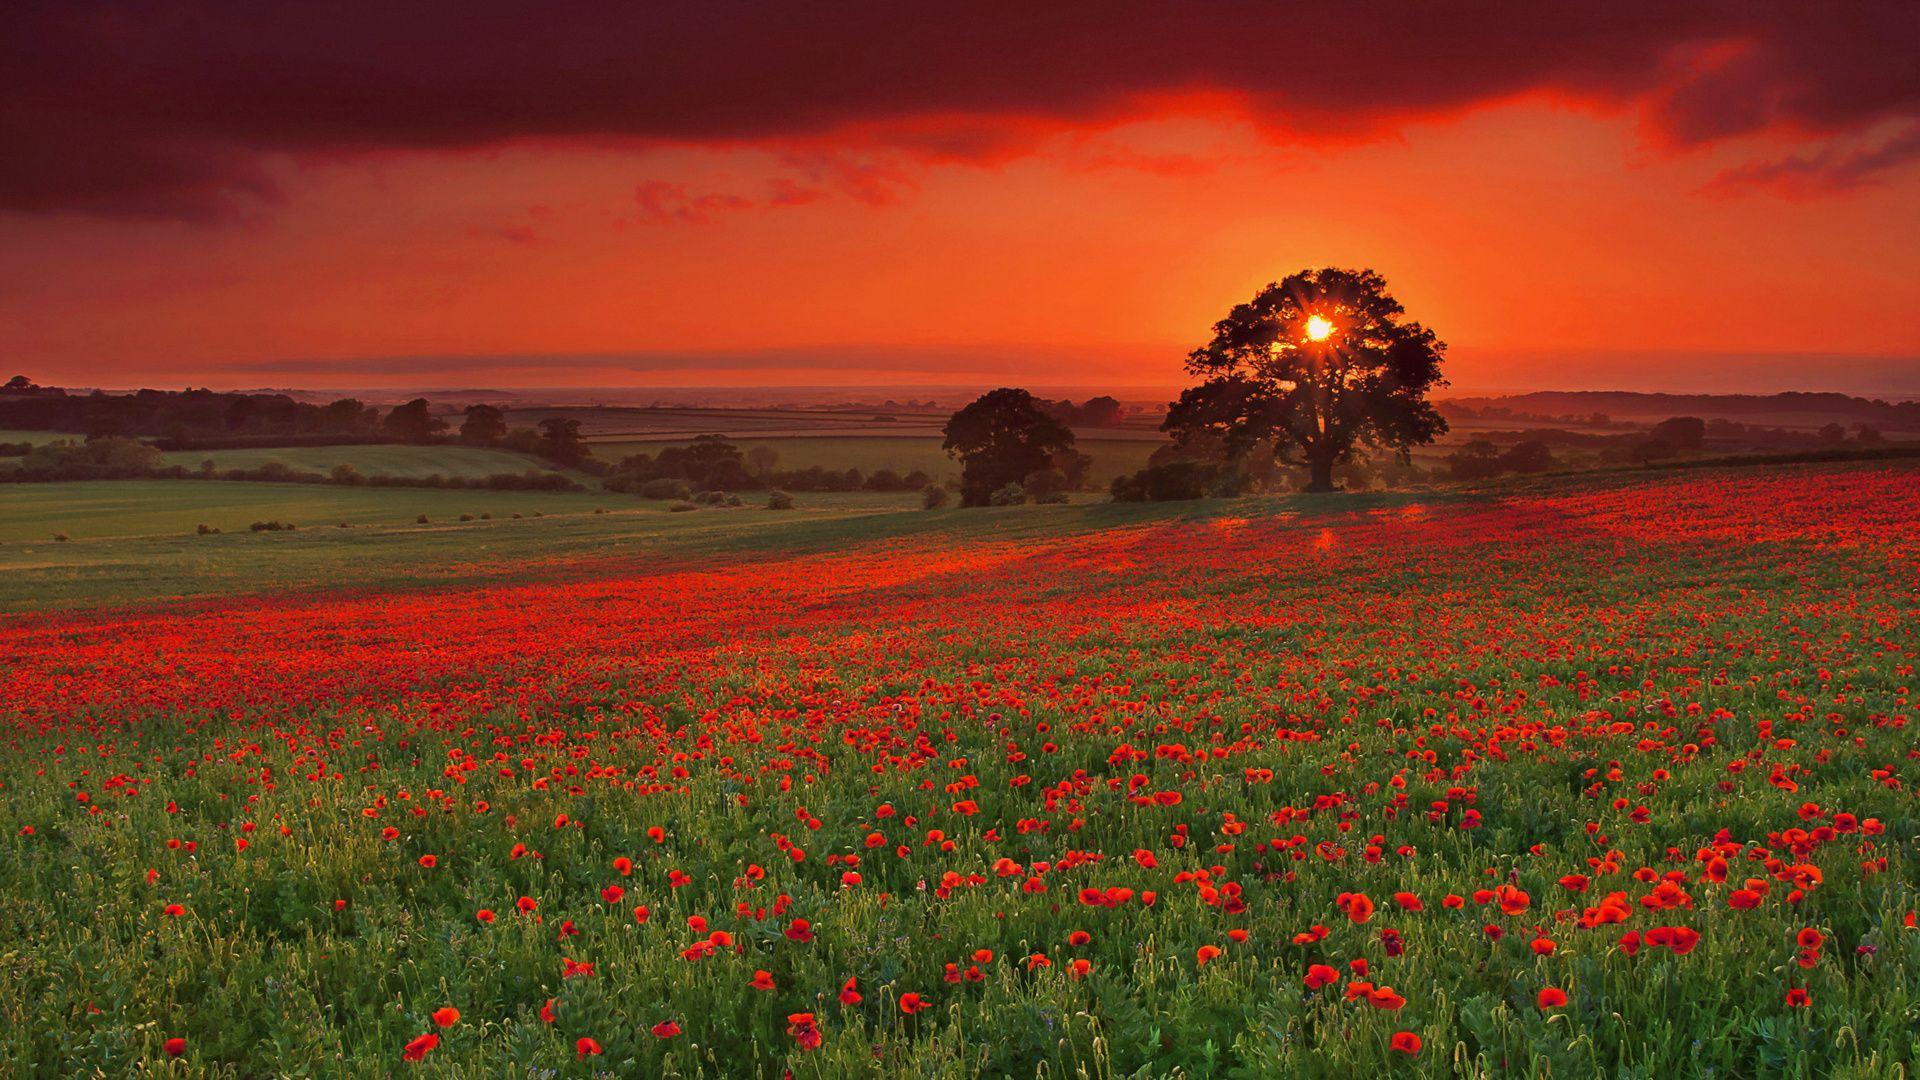 HD Poppy Red Sunset Wallpaper HD 1920x1080 or 1920x1200